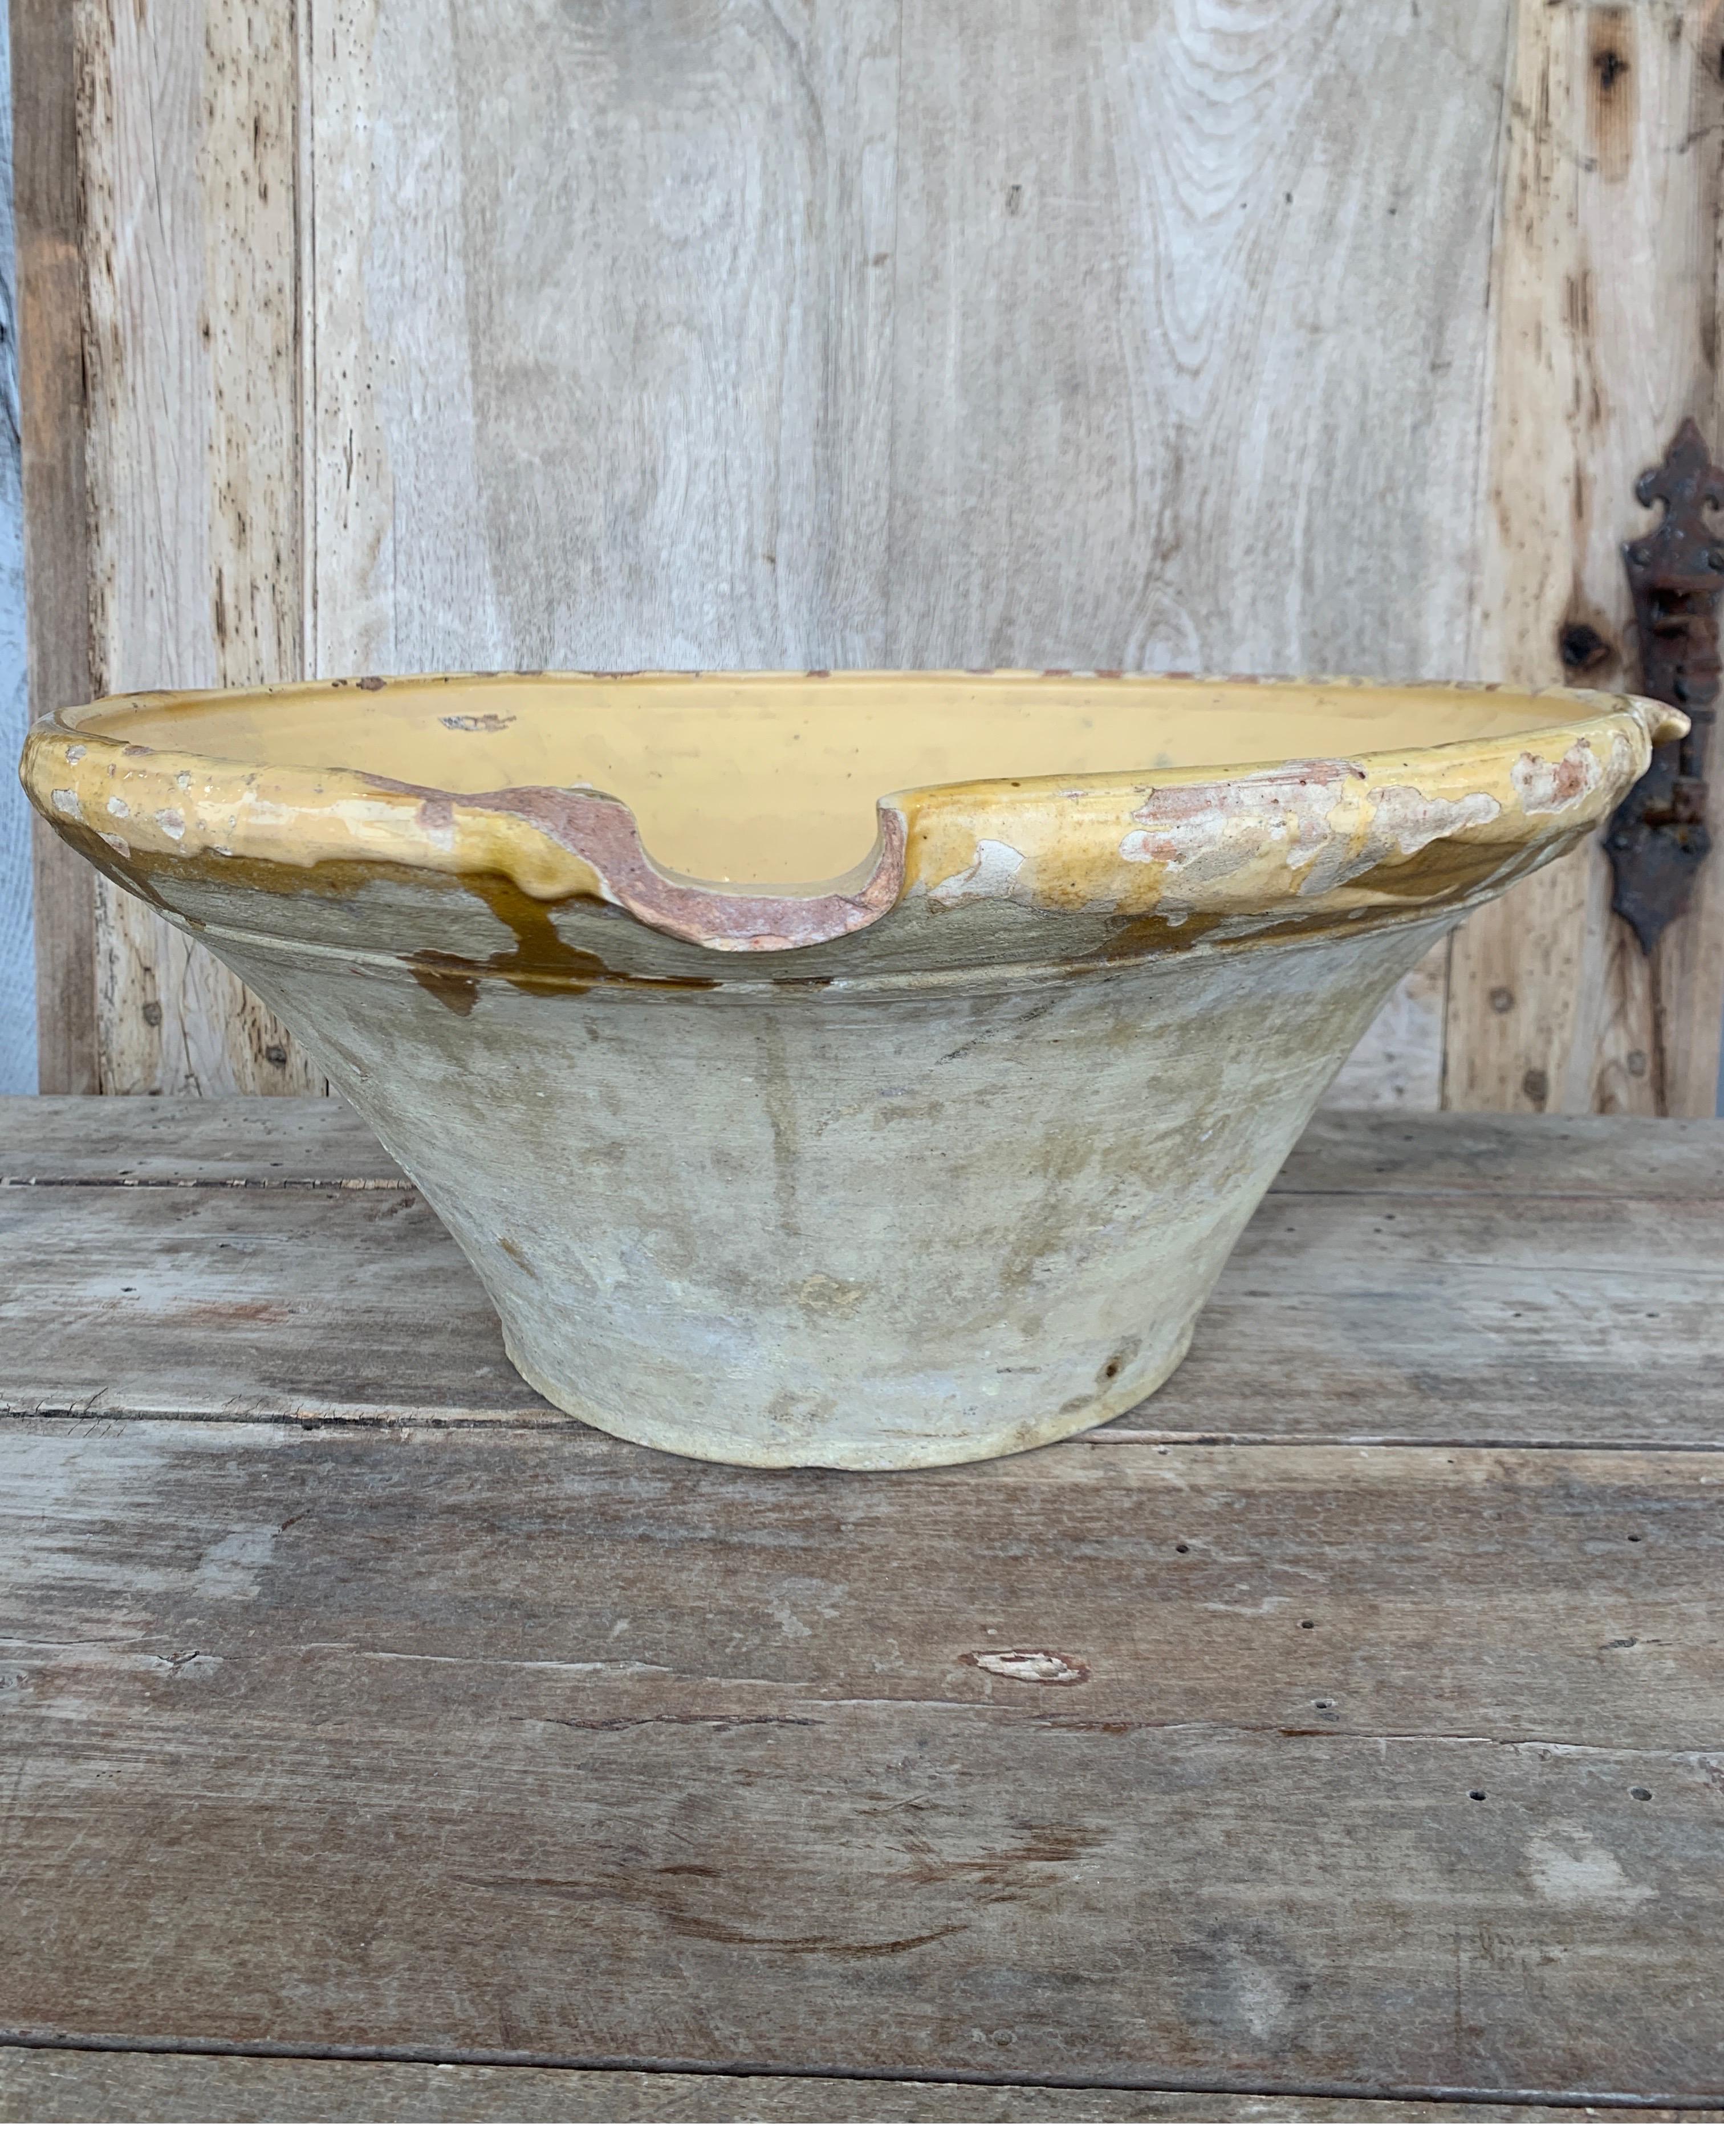 Great size bowl from France with the prettiest lemon color. It does have some small chips on pour spout as well as one handle broken but it adds to the antique character. Measures: 19 3/4 W x 18 5/8 D x 8 T.